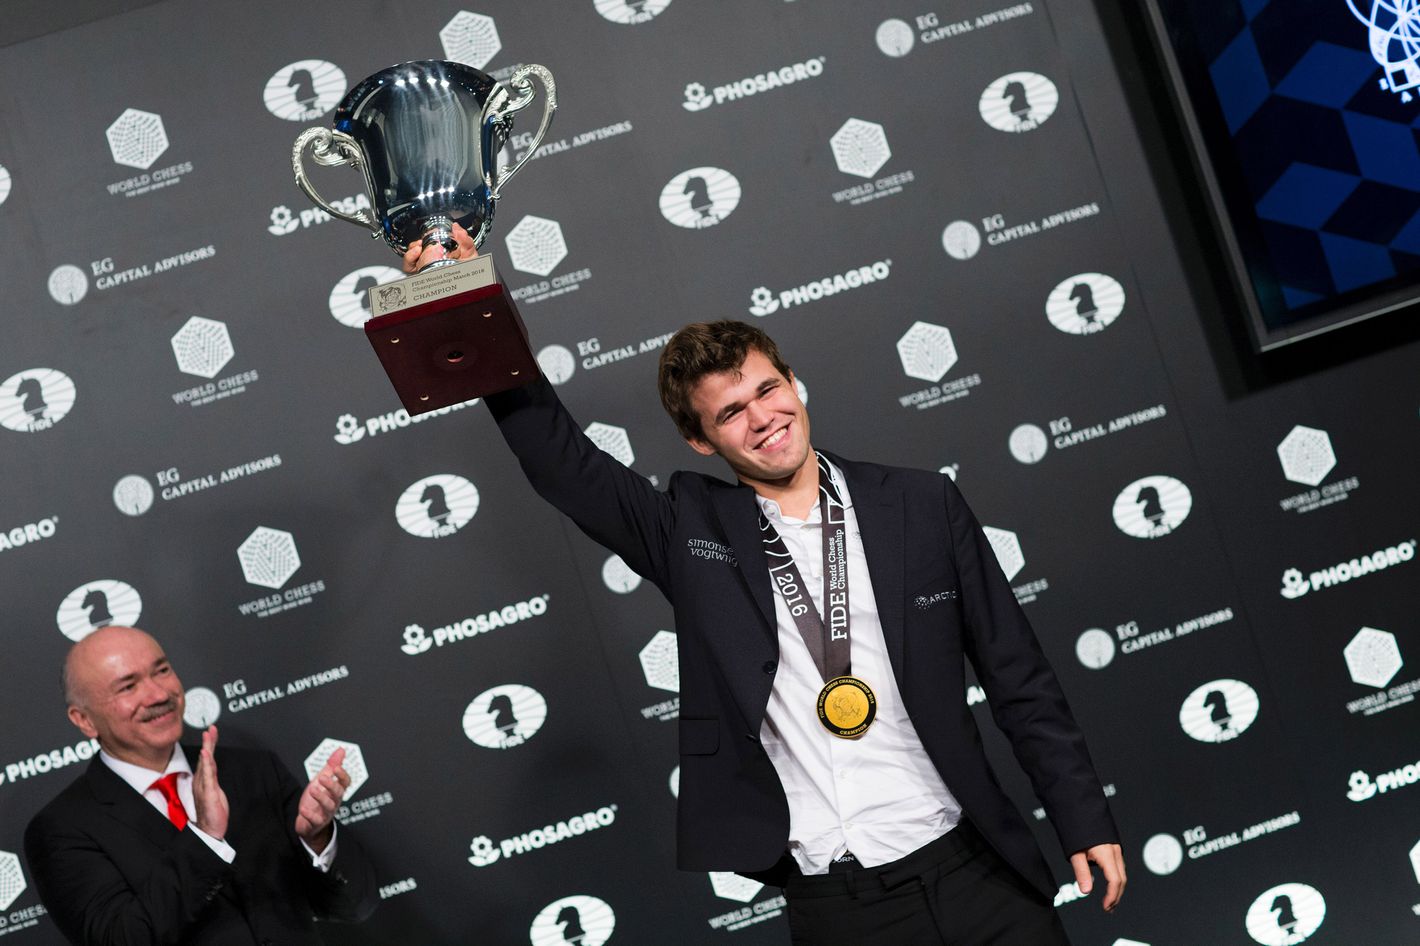 Magnus Secures the Win in the Match #chess #chesstok #magnuscarlsen, Chess